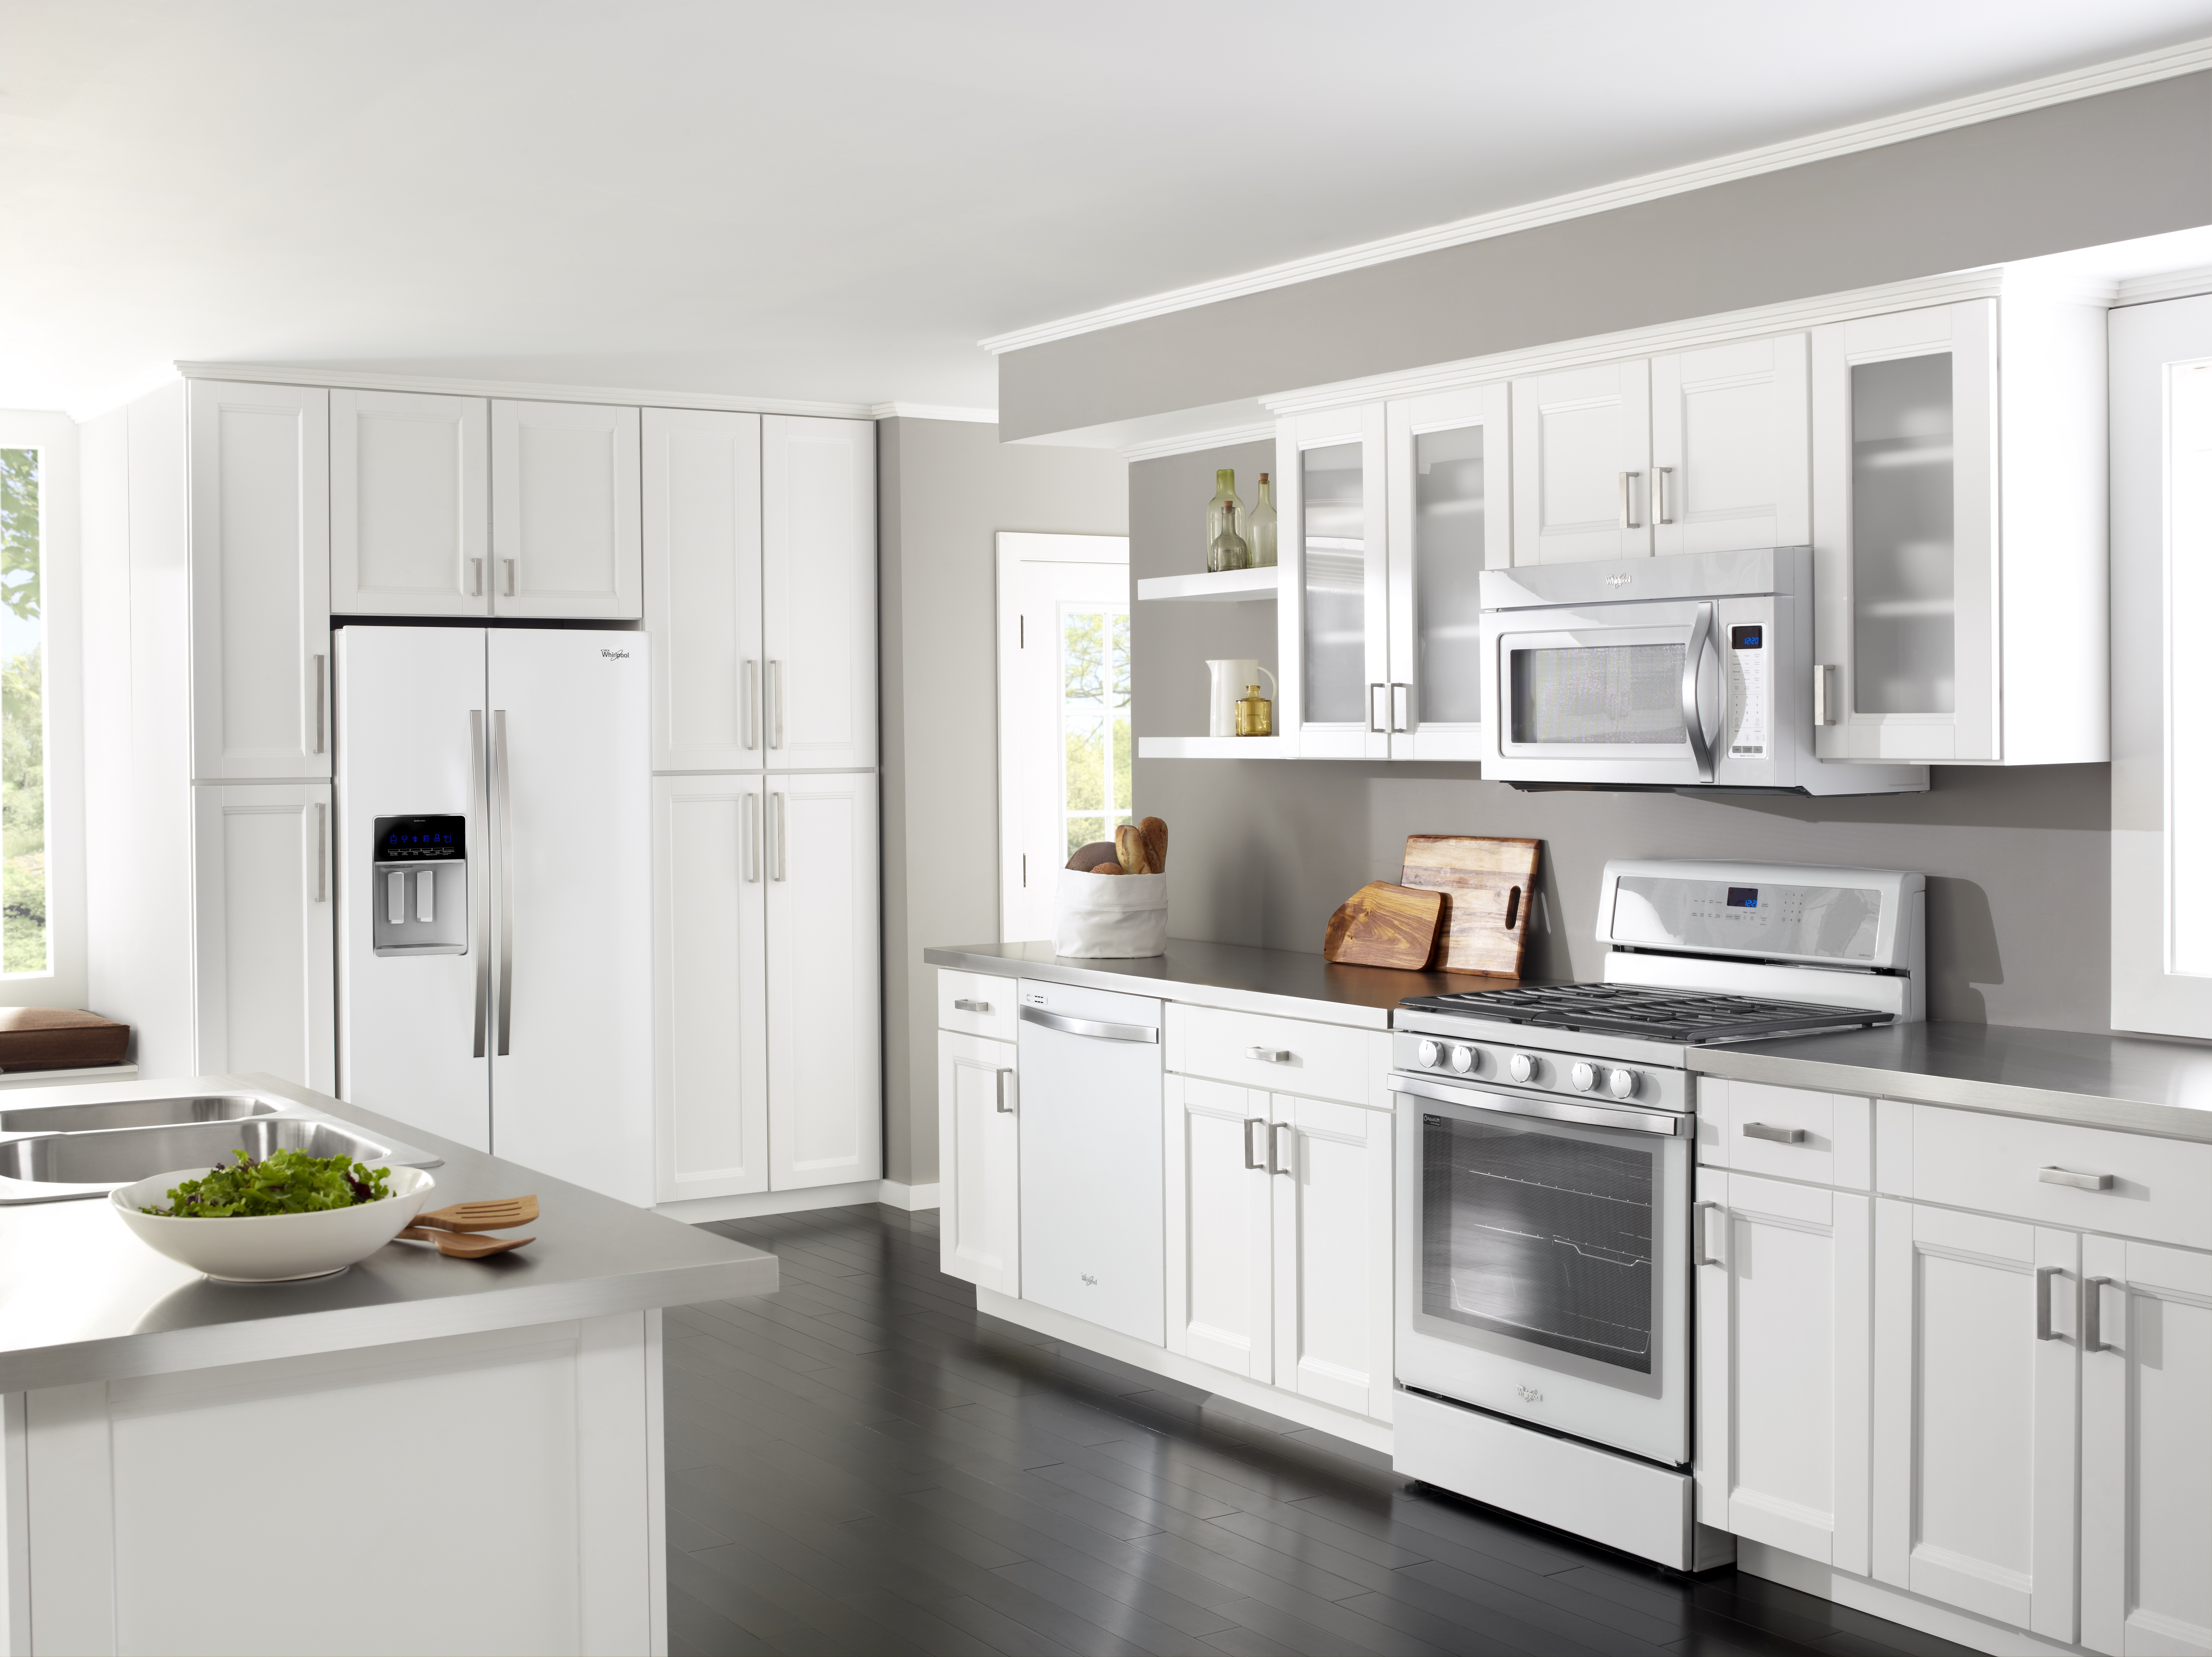 Getting the Most Our of Your New Kitchen Appliances - UrbanMoms
